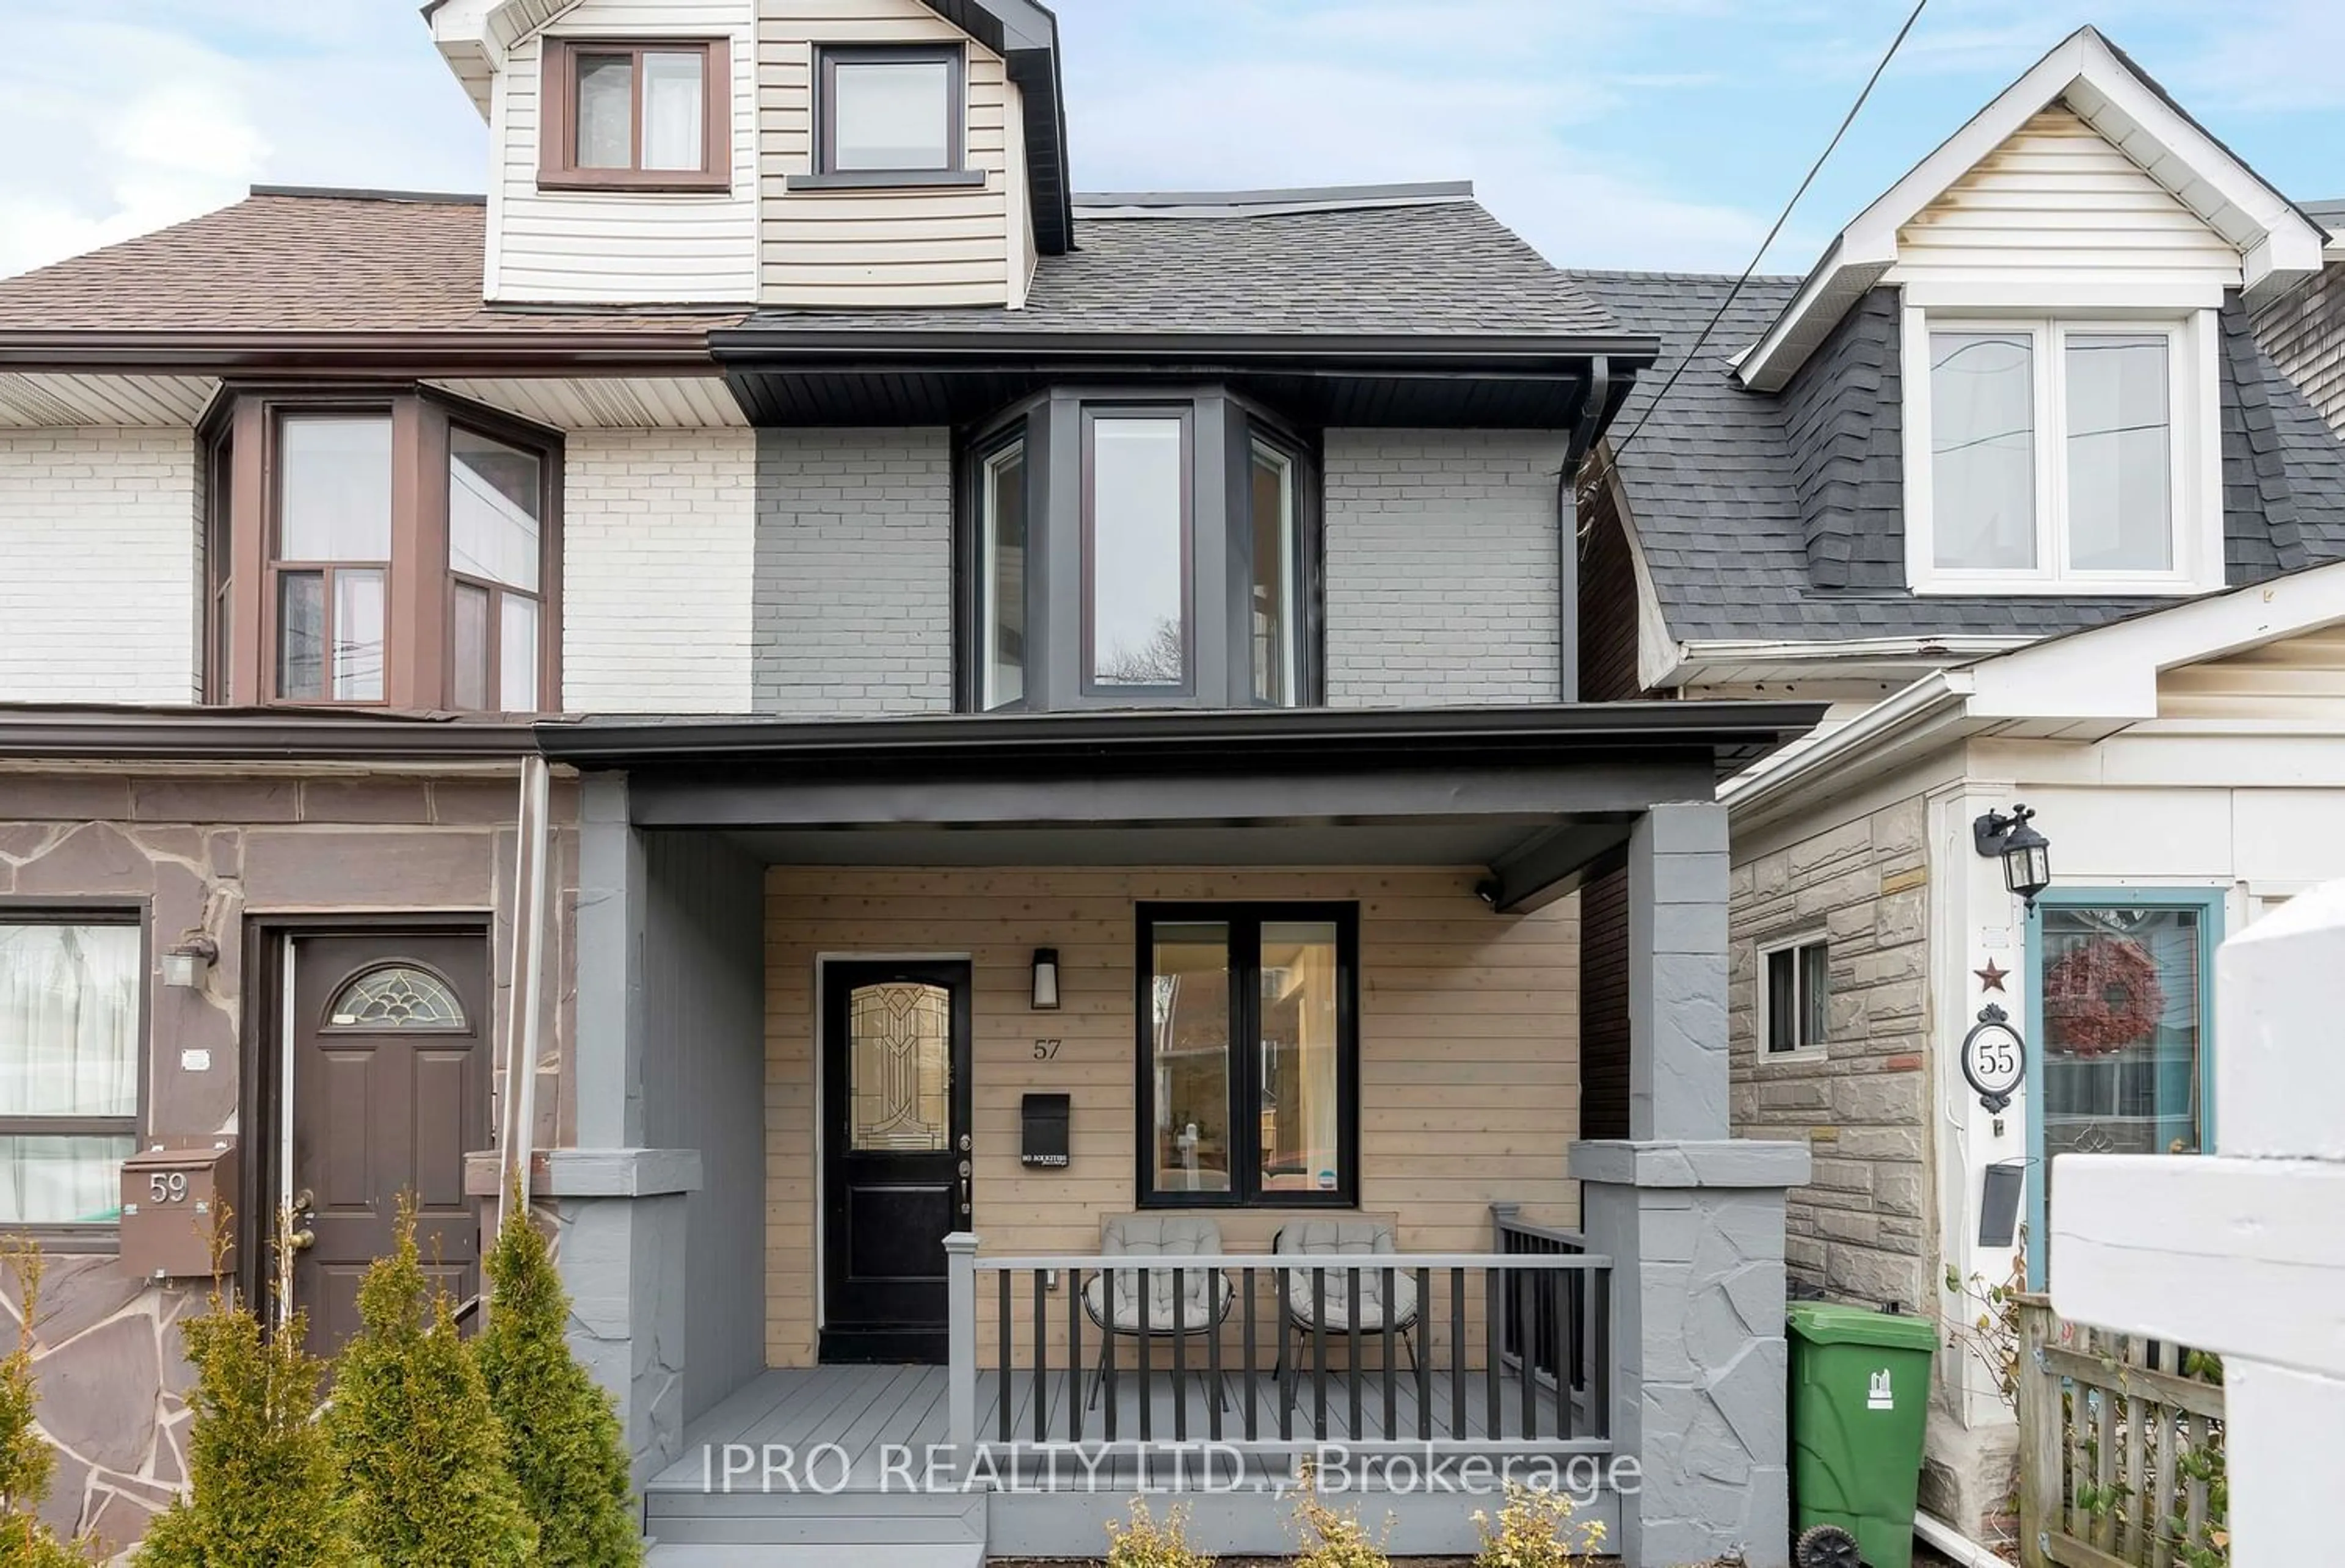 Home with unknown exterior material for 57 Amroth Ave, Toronto Ontario M4C 4H3